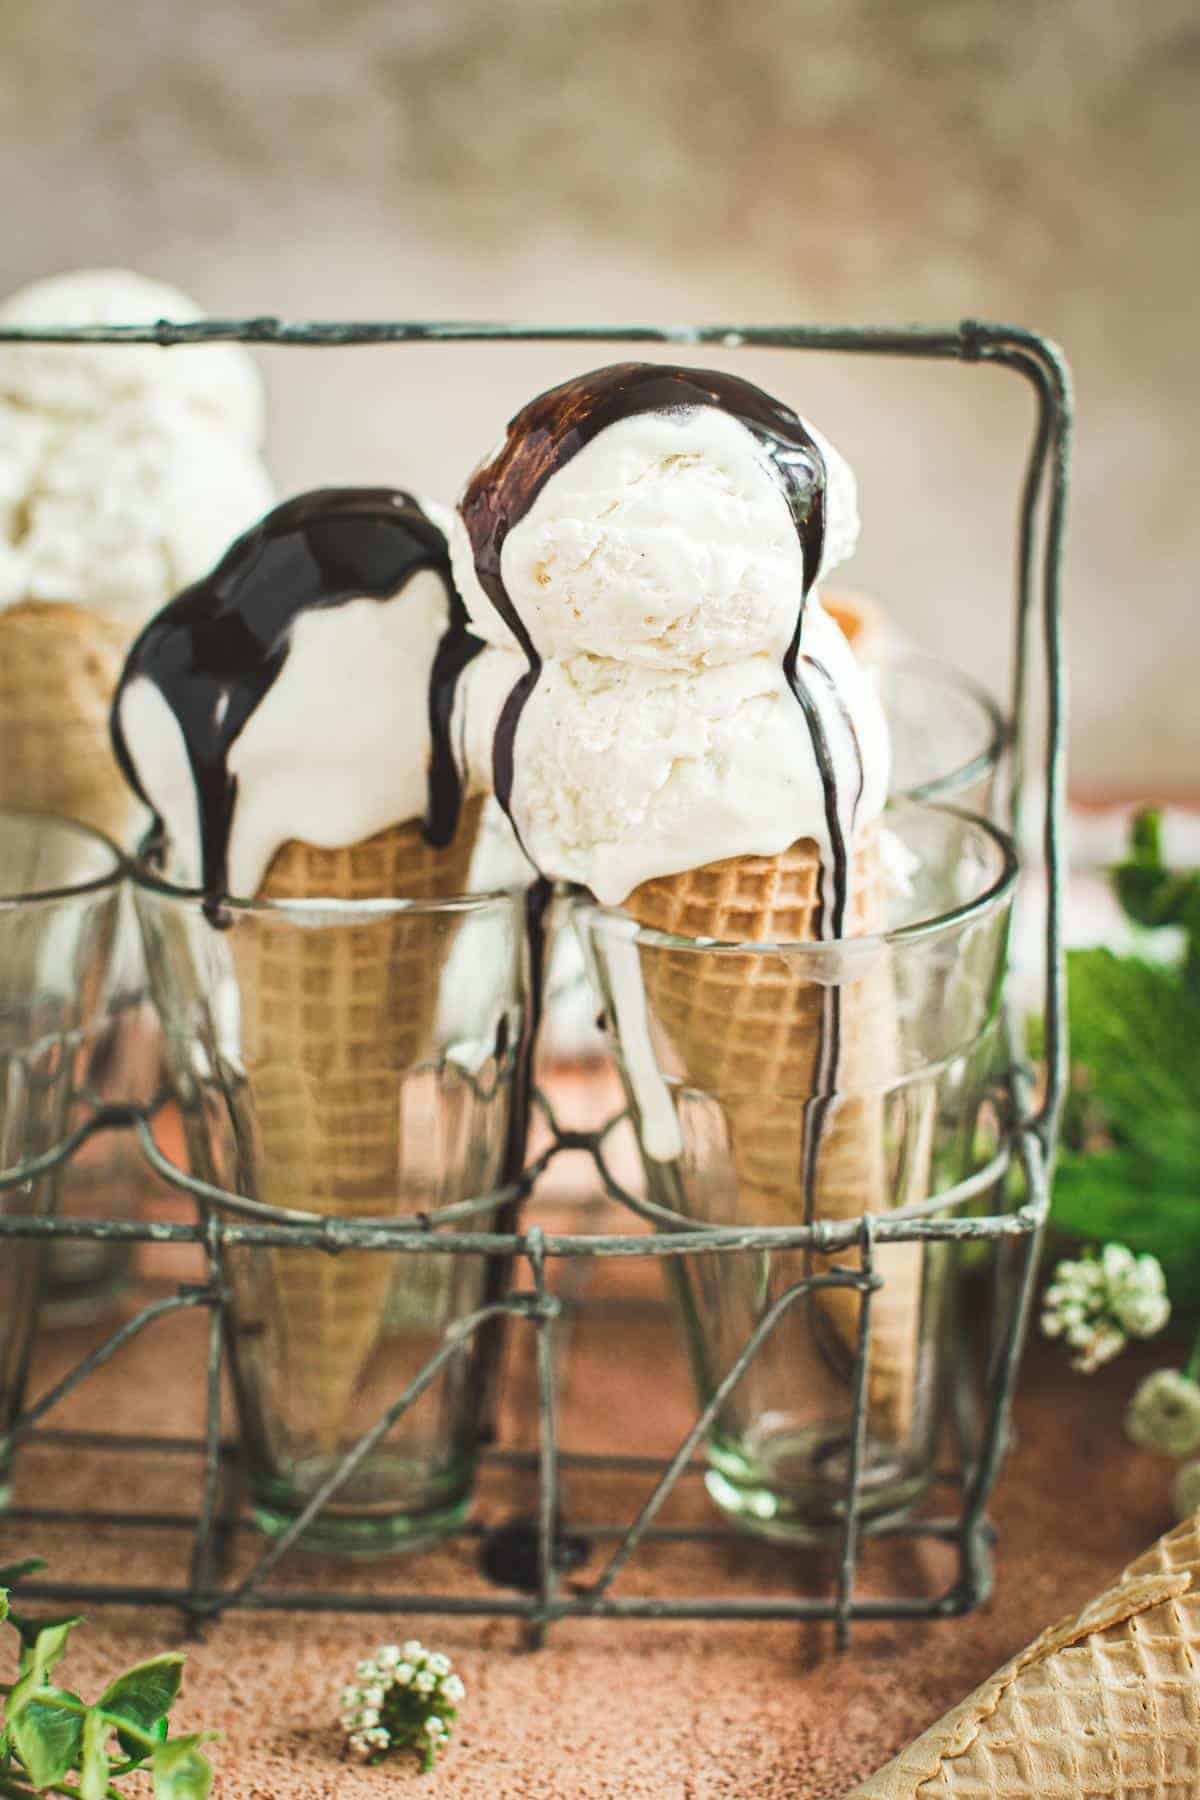 Vanilla bean ice cream in a cone topped with chocolate syrup. Cones are in a glass.